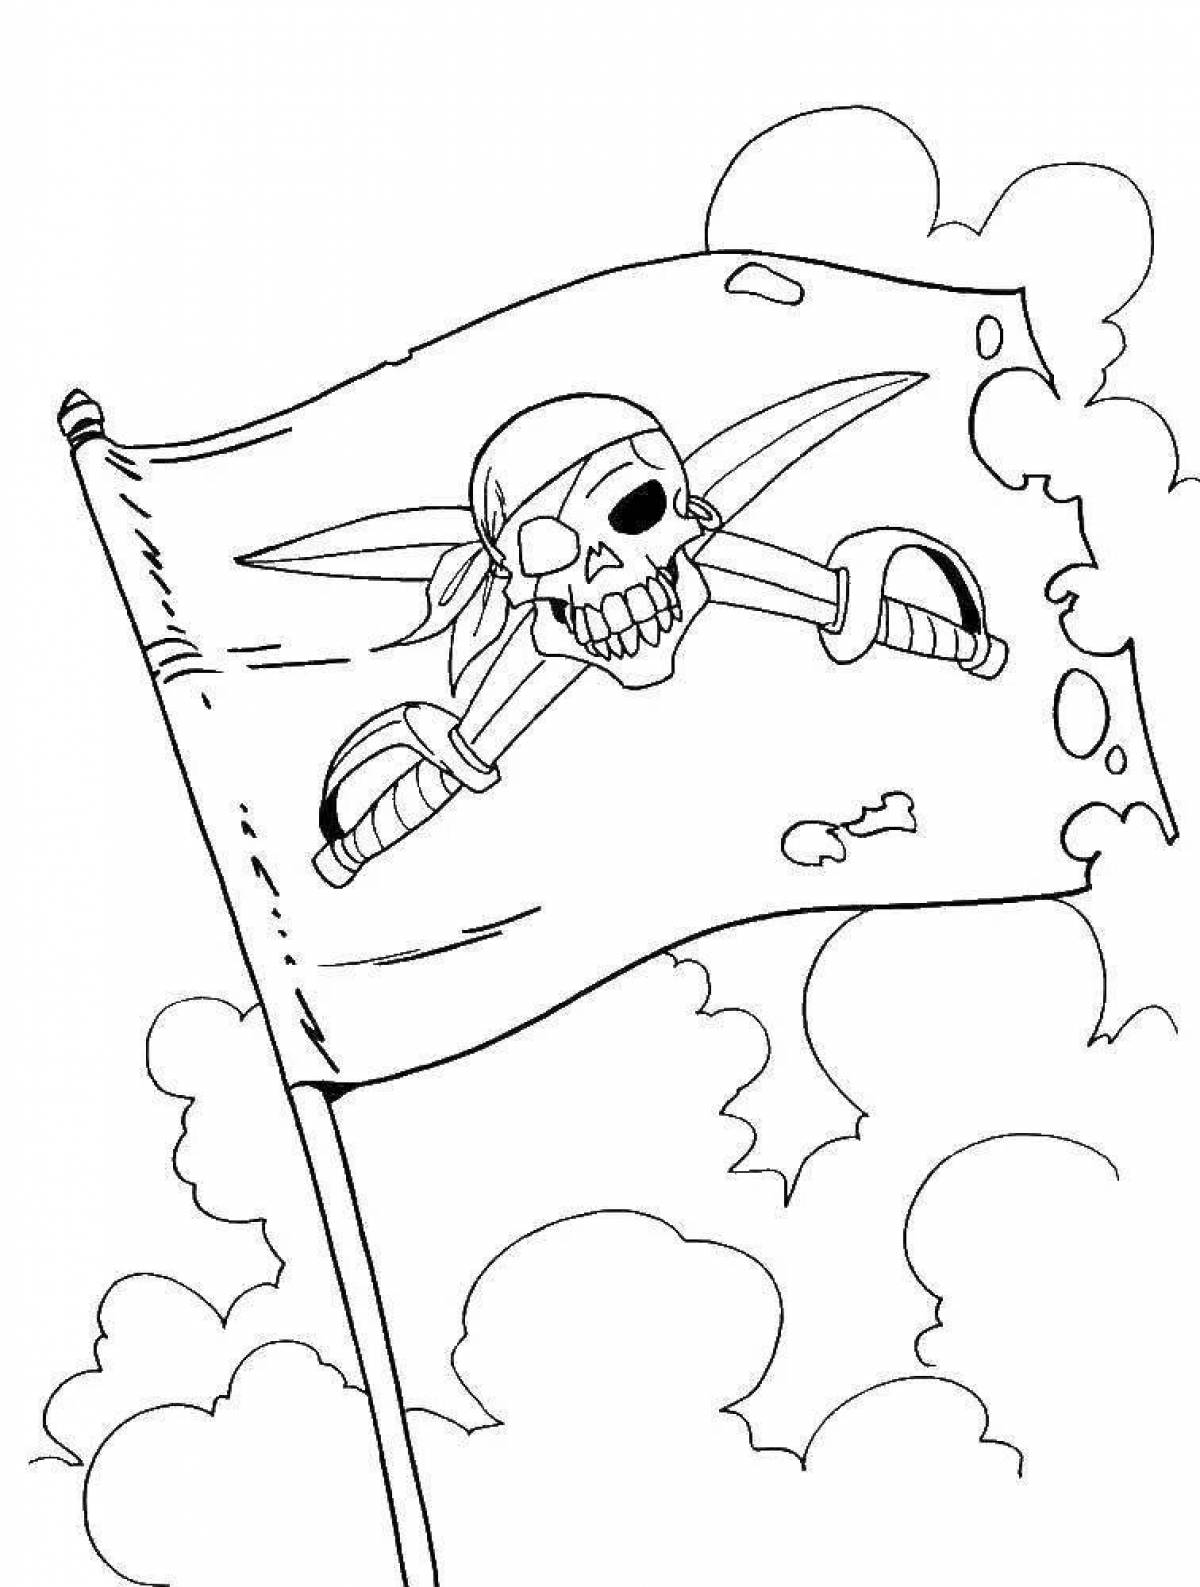 Coloring book formidable pirate